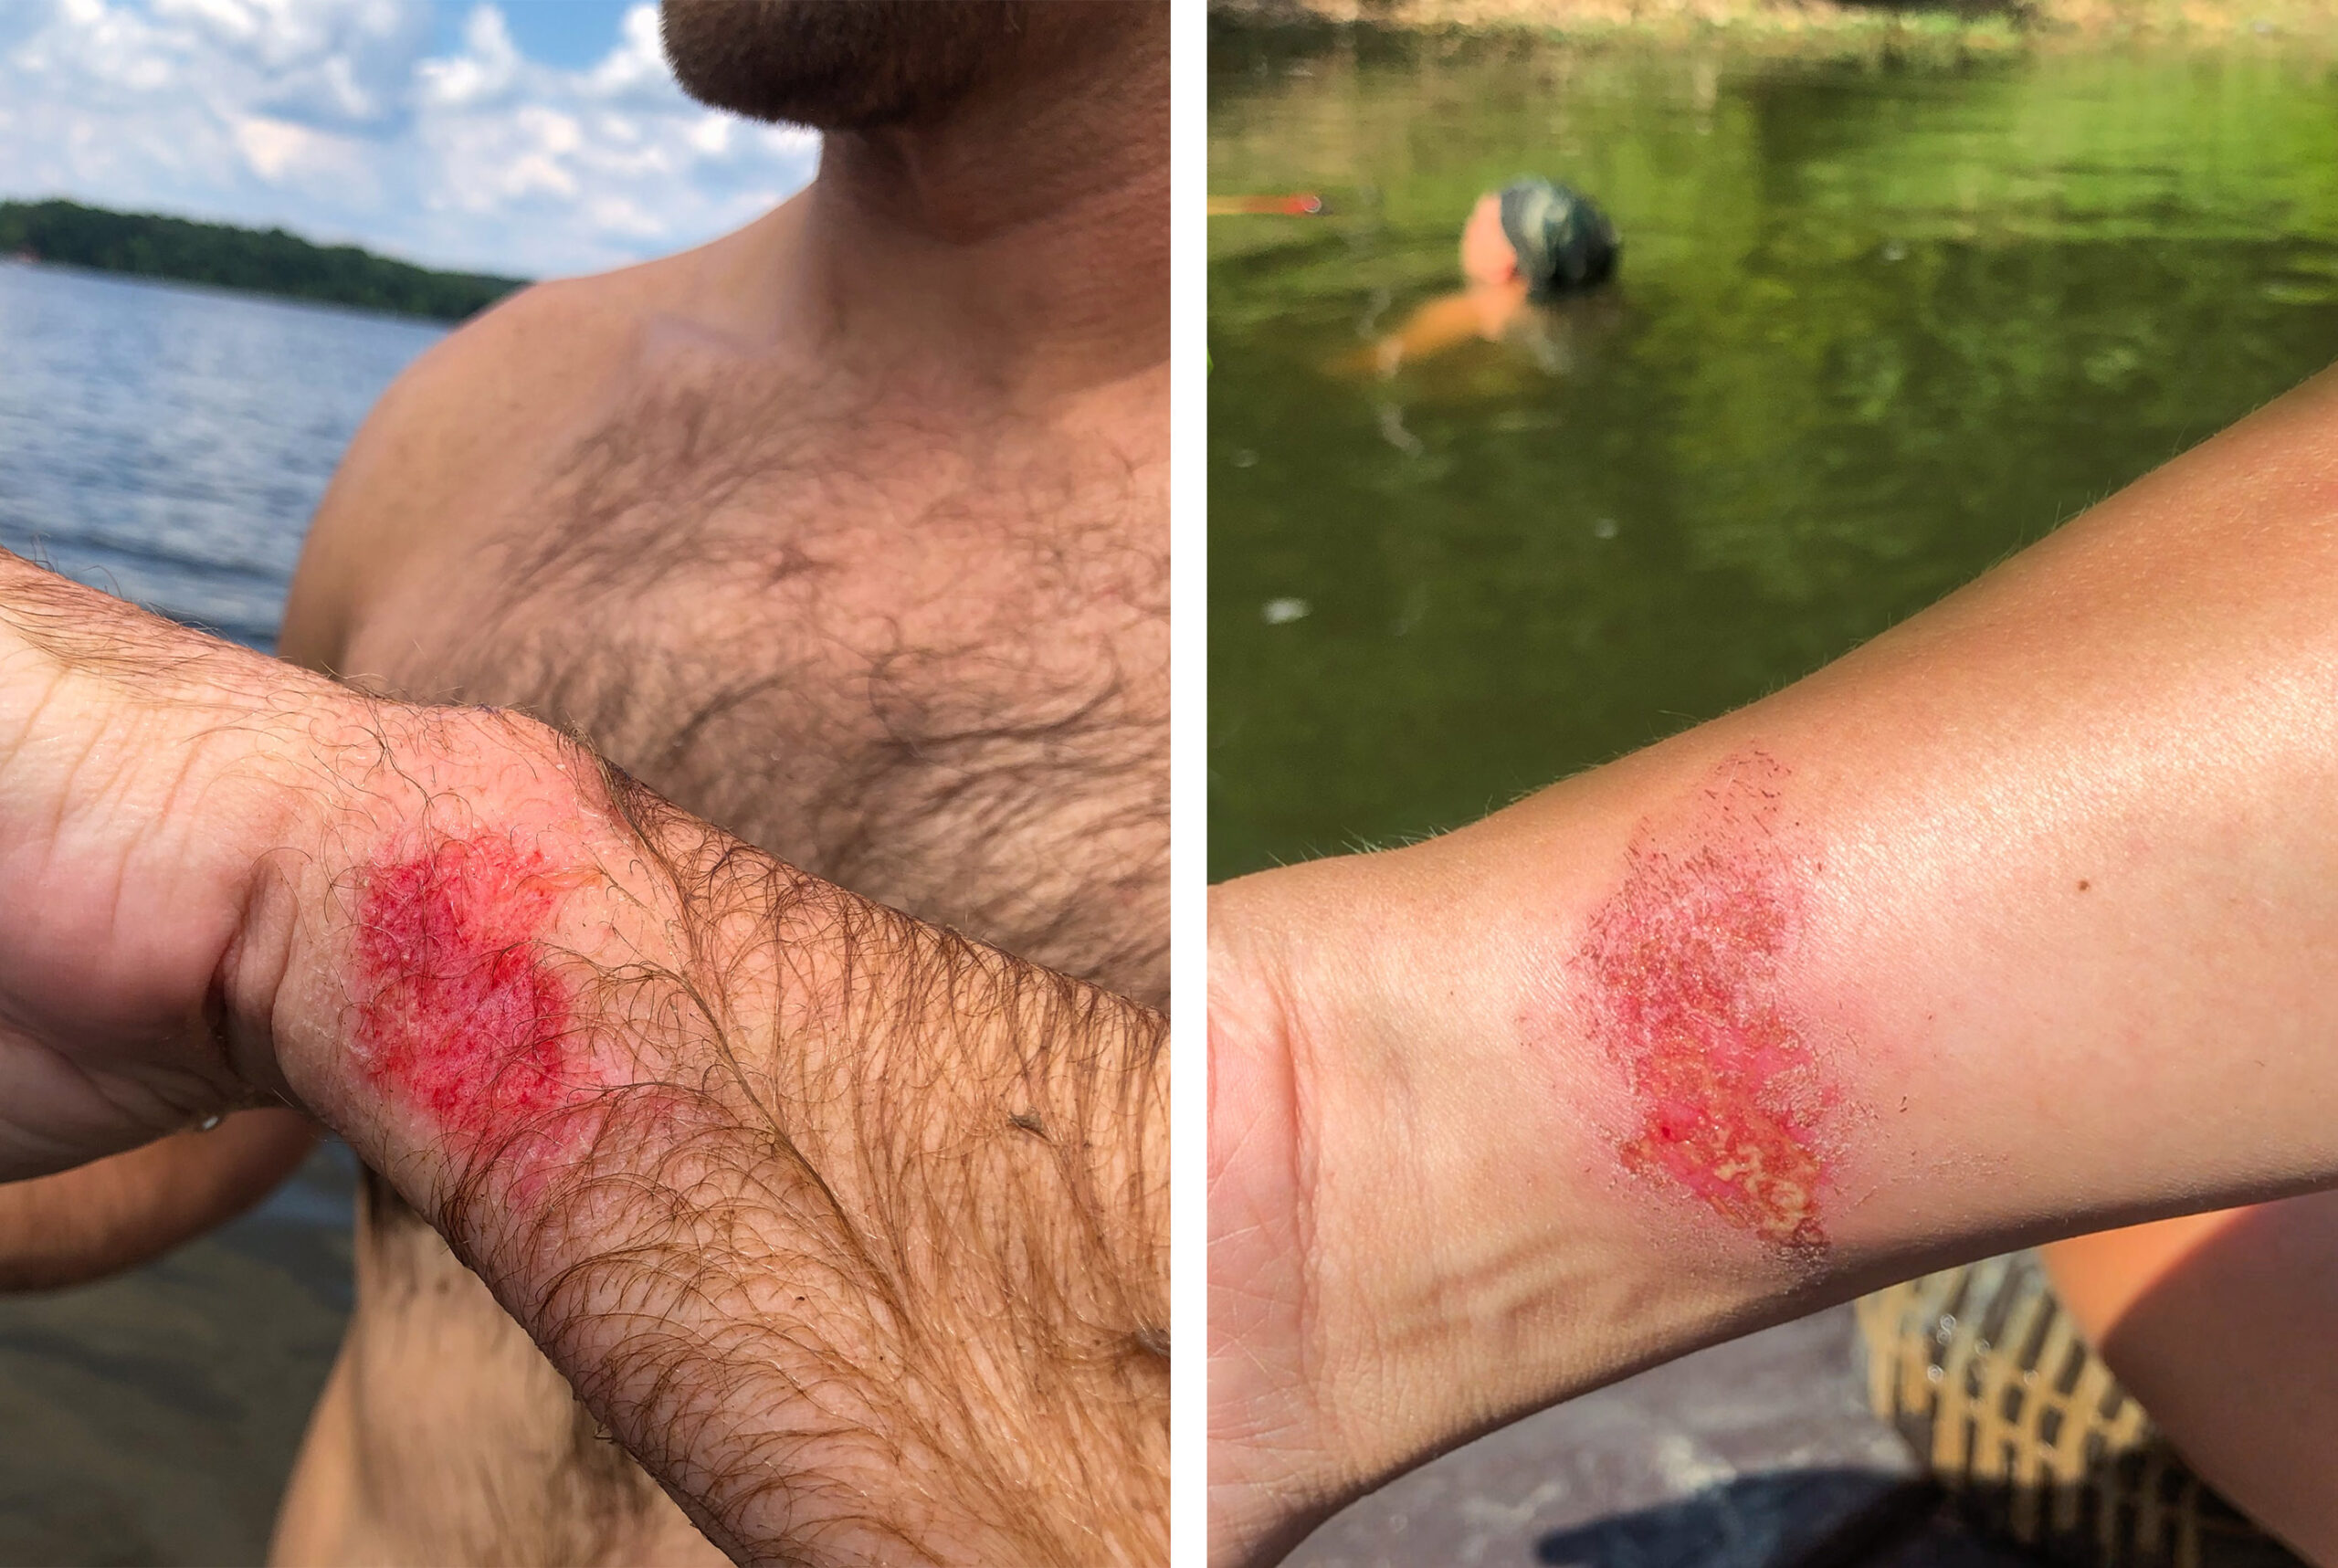 Examples of wrist rash sustained while noodling